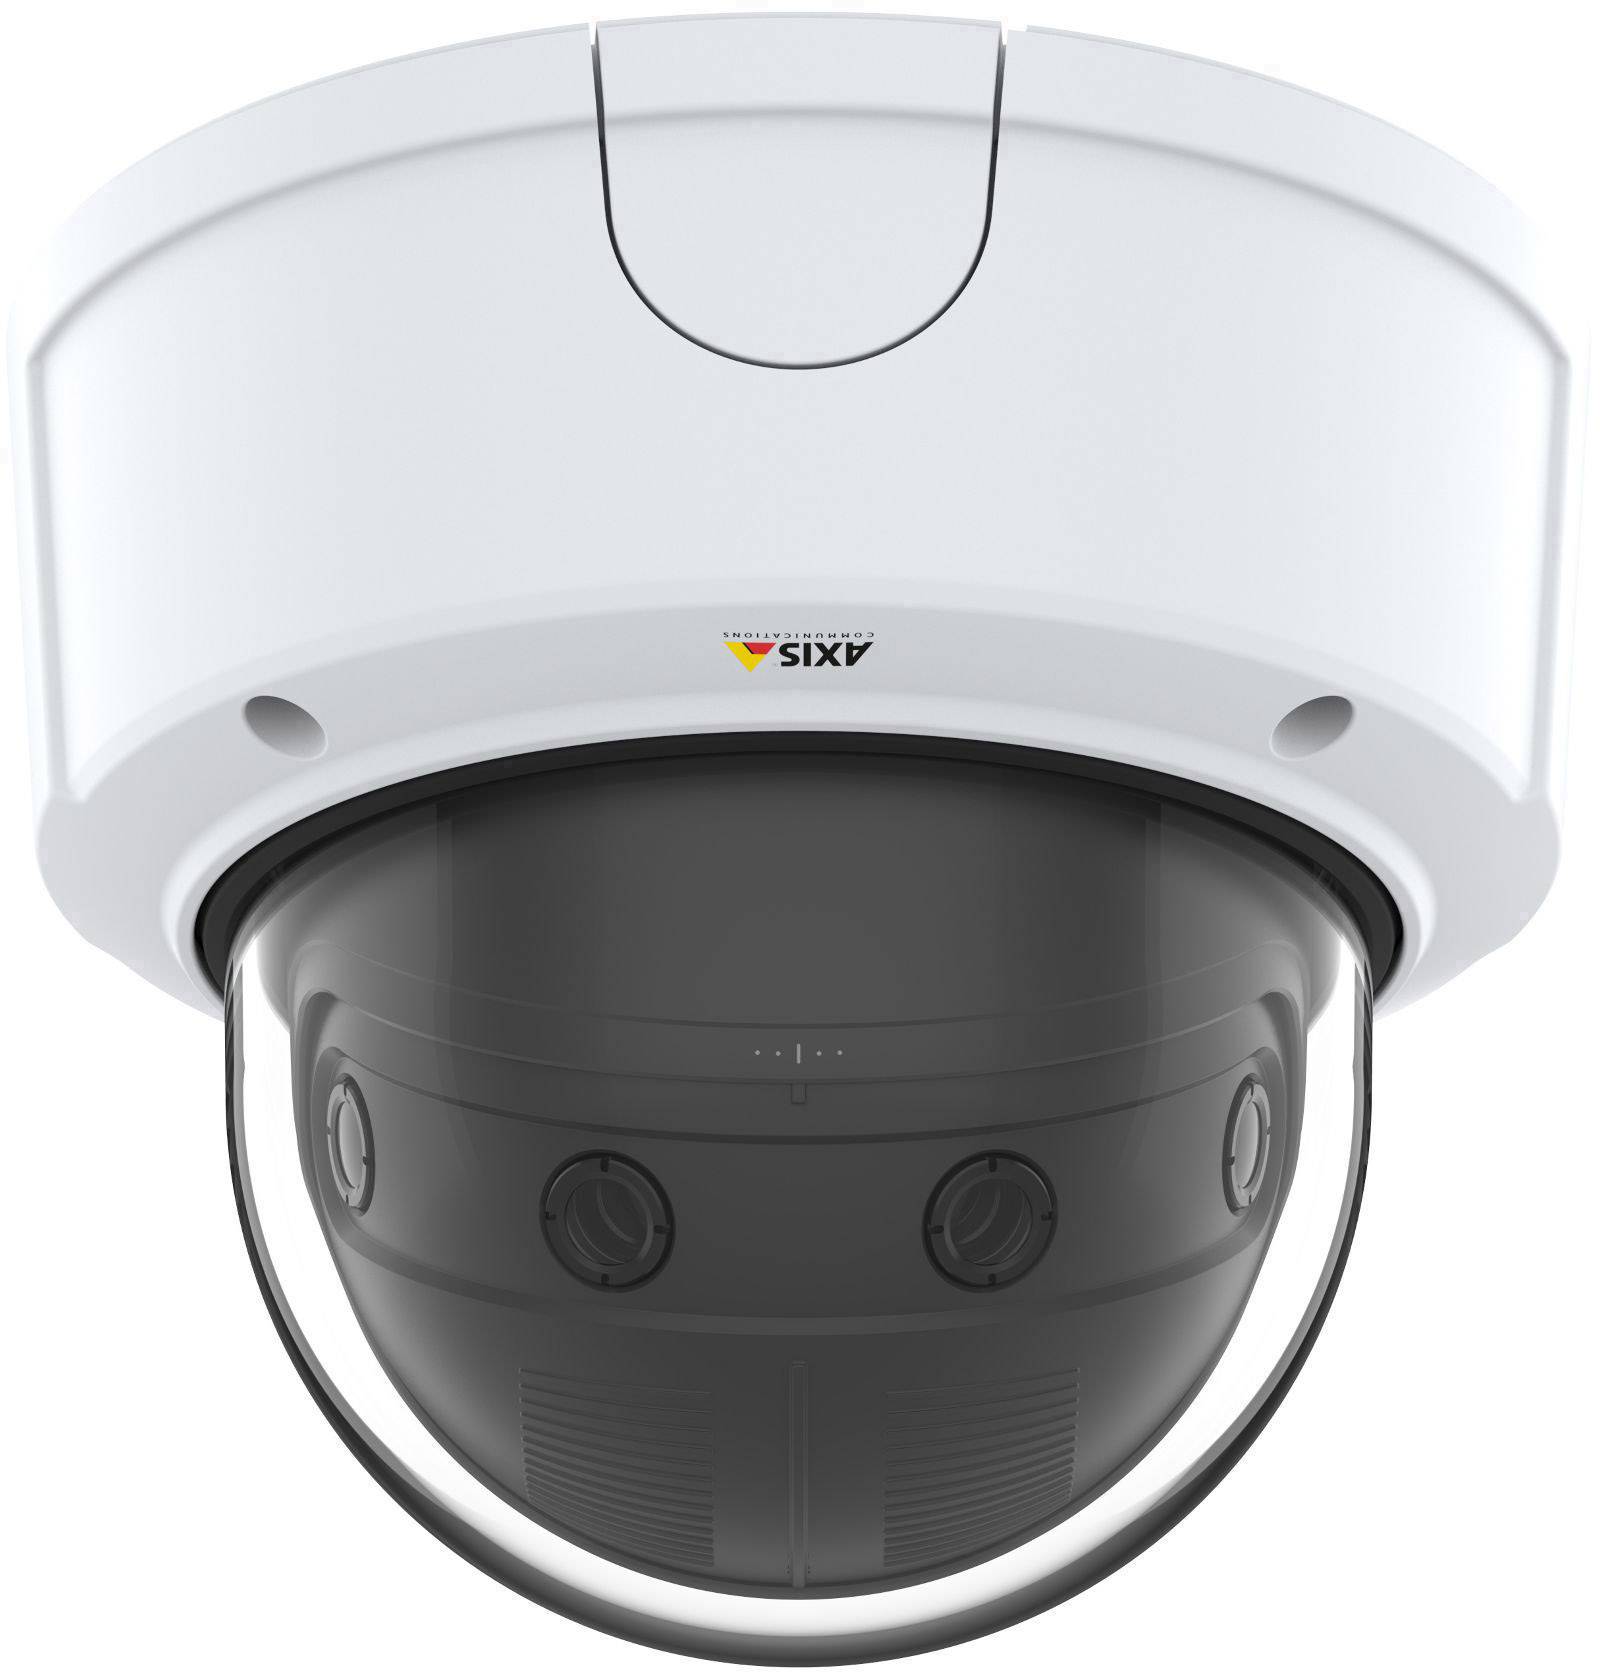 AXIS P3807-PVE Network Camera - Panoramakamera - Kuppel - Farbe - 8,3 MP - 4320 x 1920 - 4K - feste